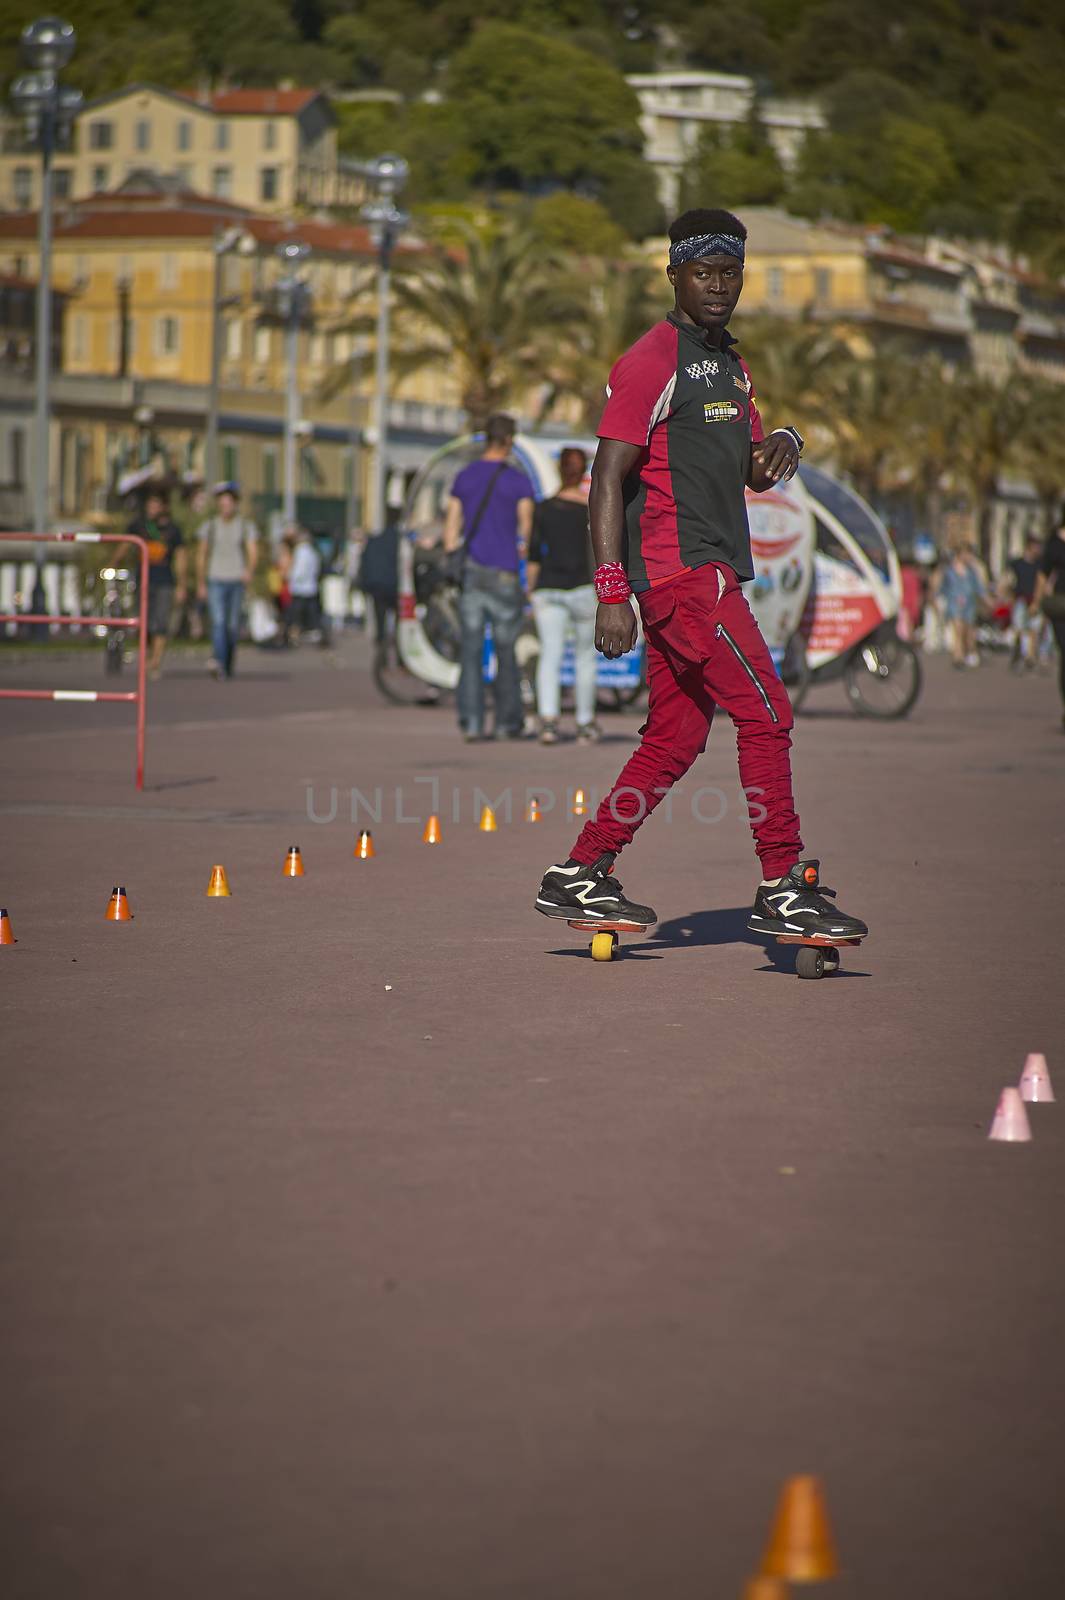 Skater on the street by pippocarlot